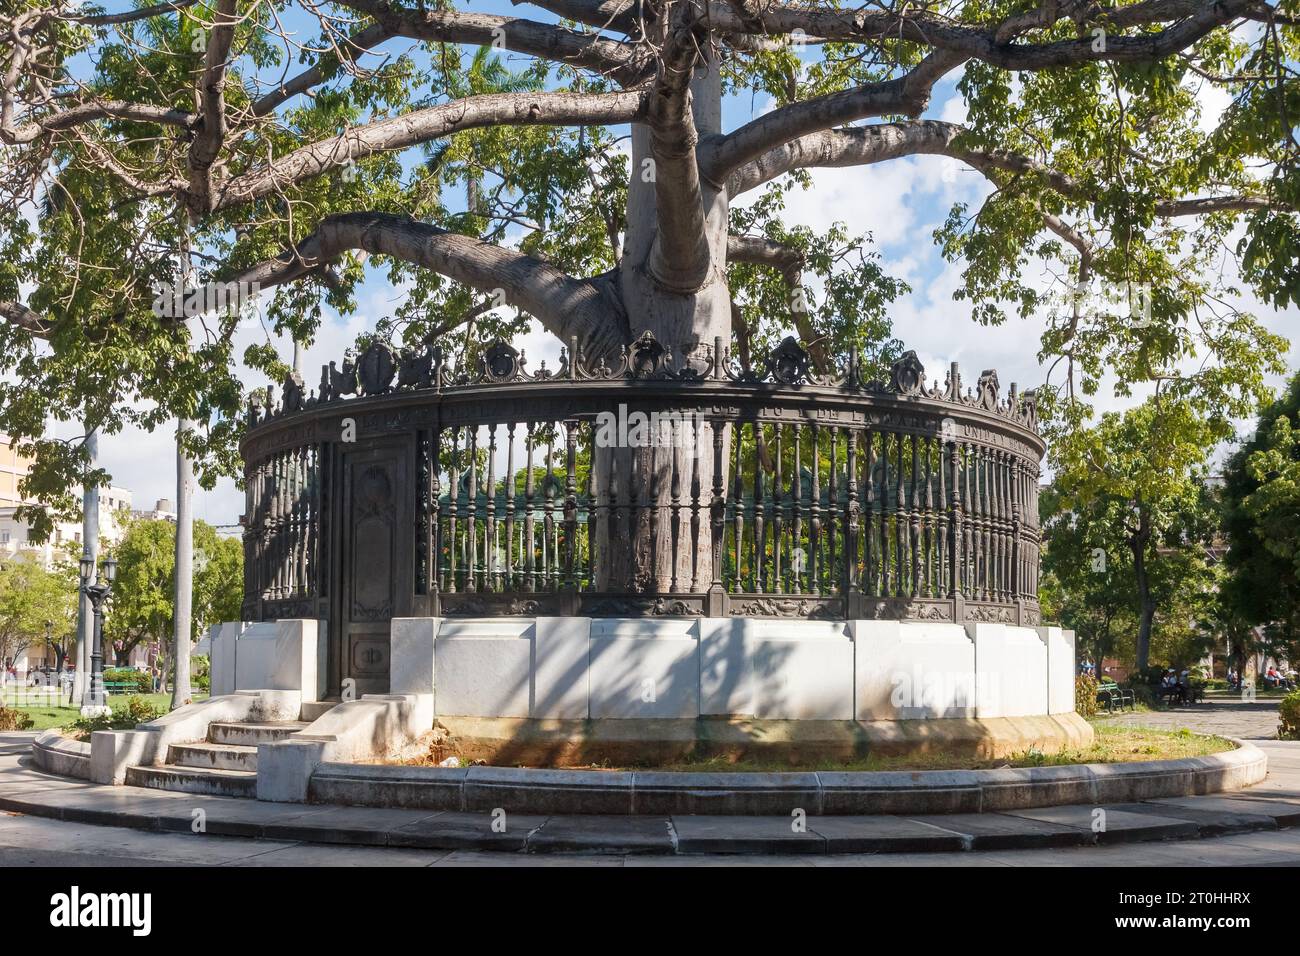 Ceiba tree surrounded by a fence in the Central Park or Parque Central. The tree is a symbol in the Cuban culture dating back to the independence wars Stock Photo